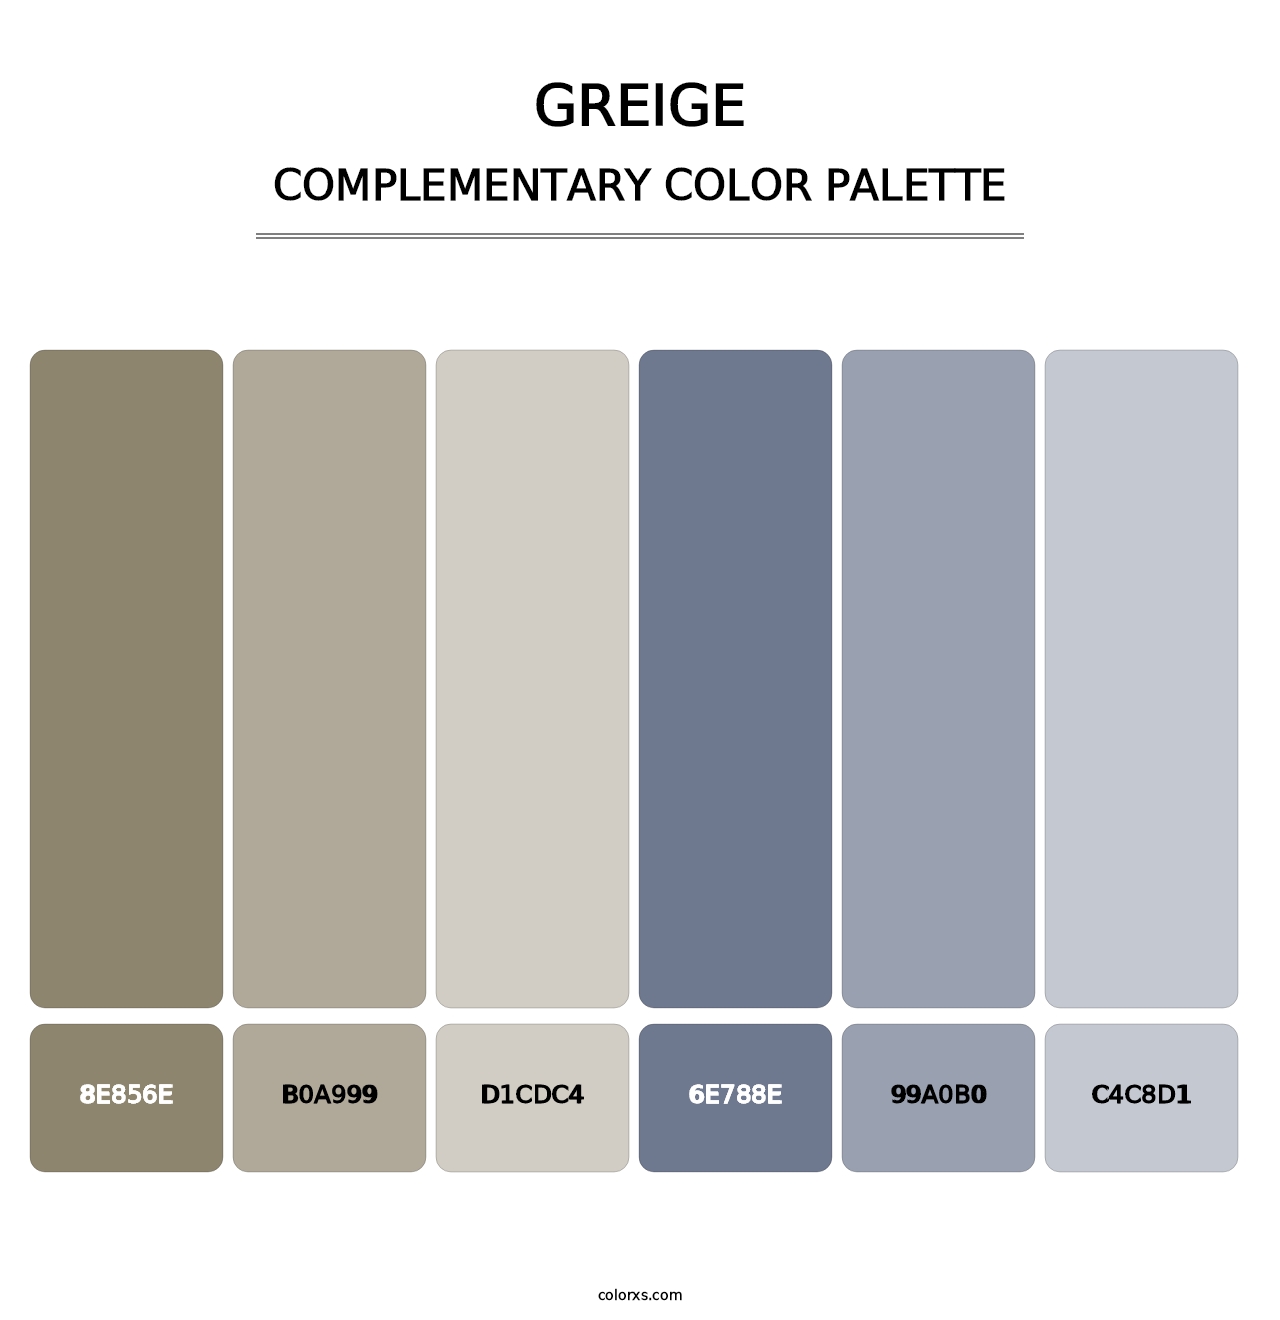 Greige - Complementary Color Palette